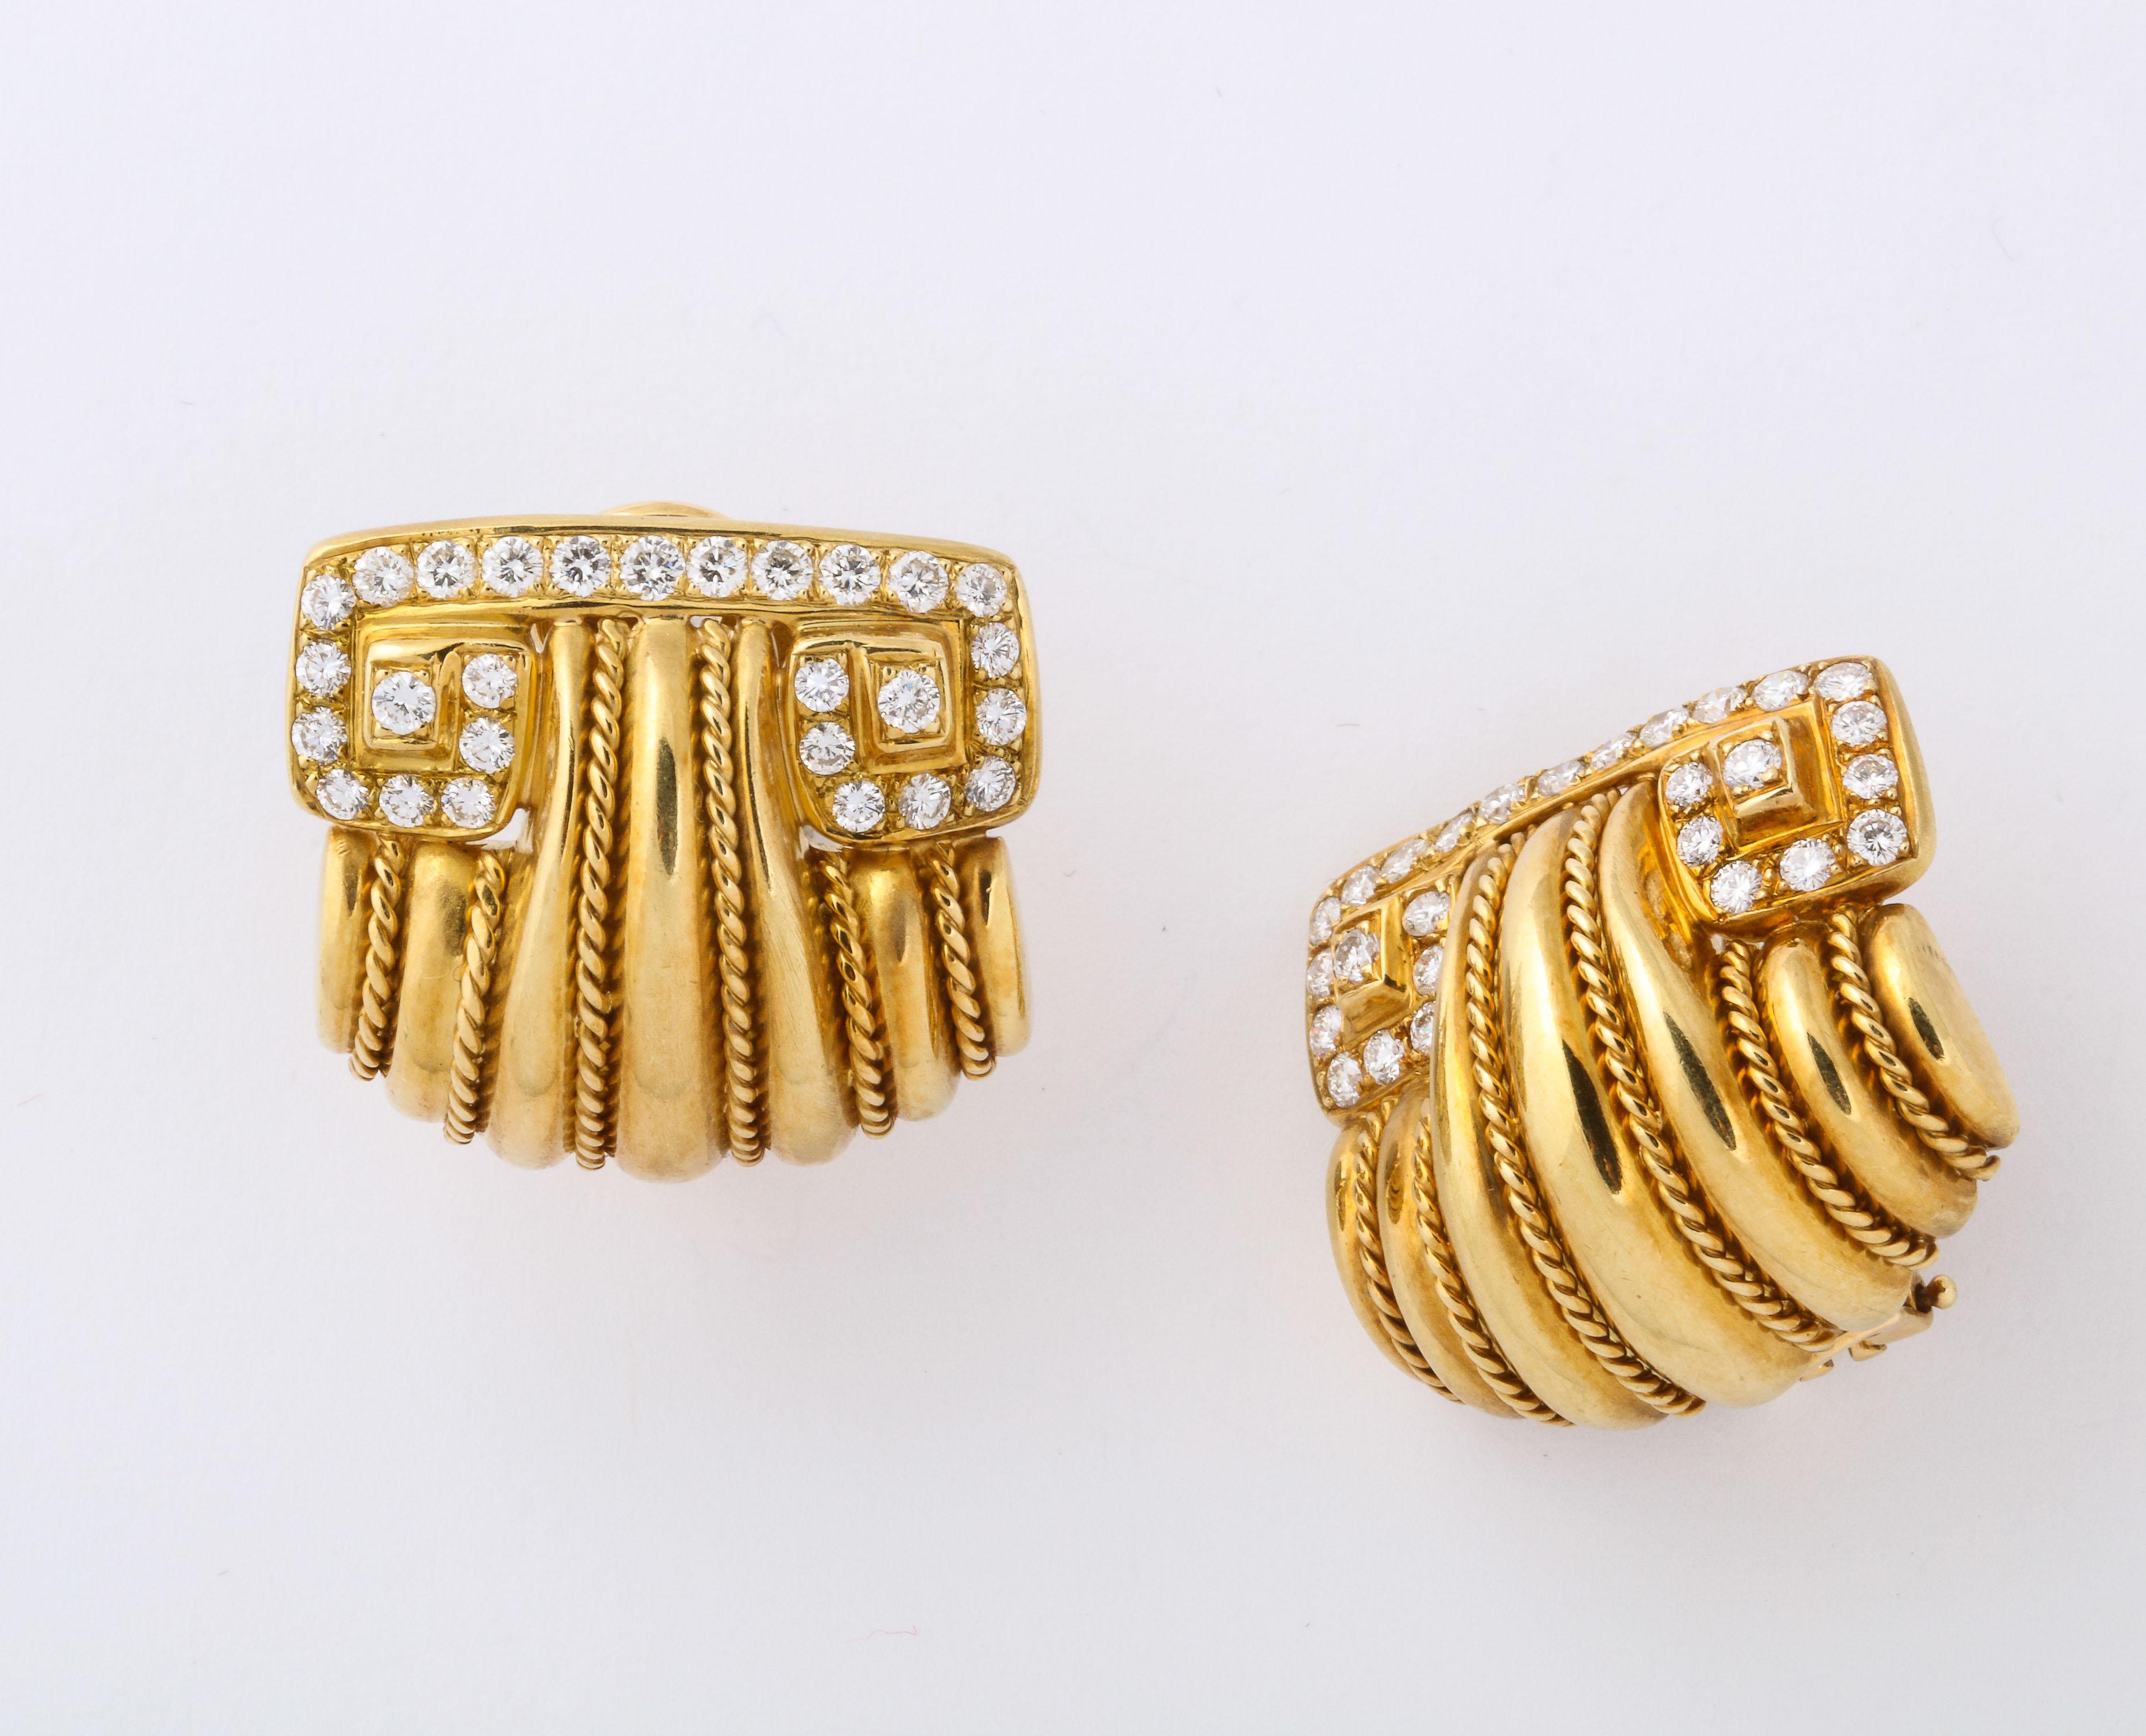 18kt Yellow Gold Clip on Earrings with Post. which can be removed.  Signed JBC and marked 18K.  Greecian  Style Capitals with Doric elements paved with full cut clean white Diamonds.  54 Diamonds weighing approximately 1.25cts.  
Applied rope